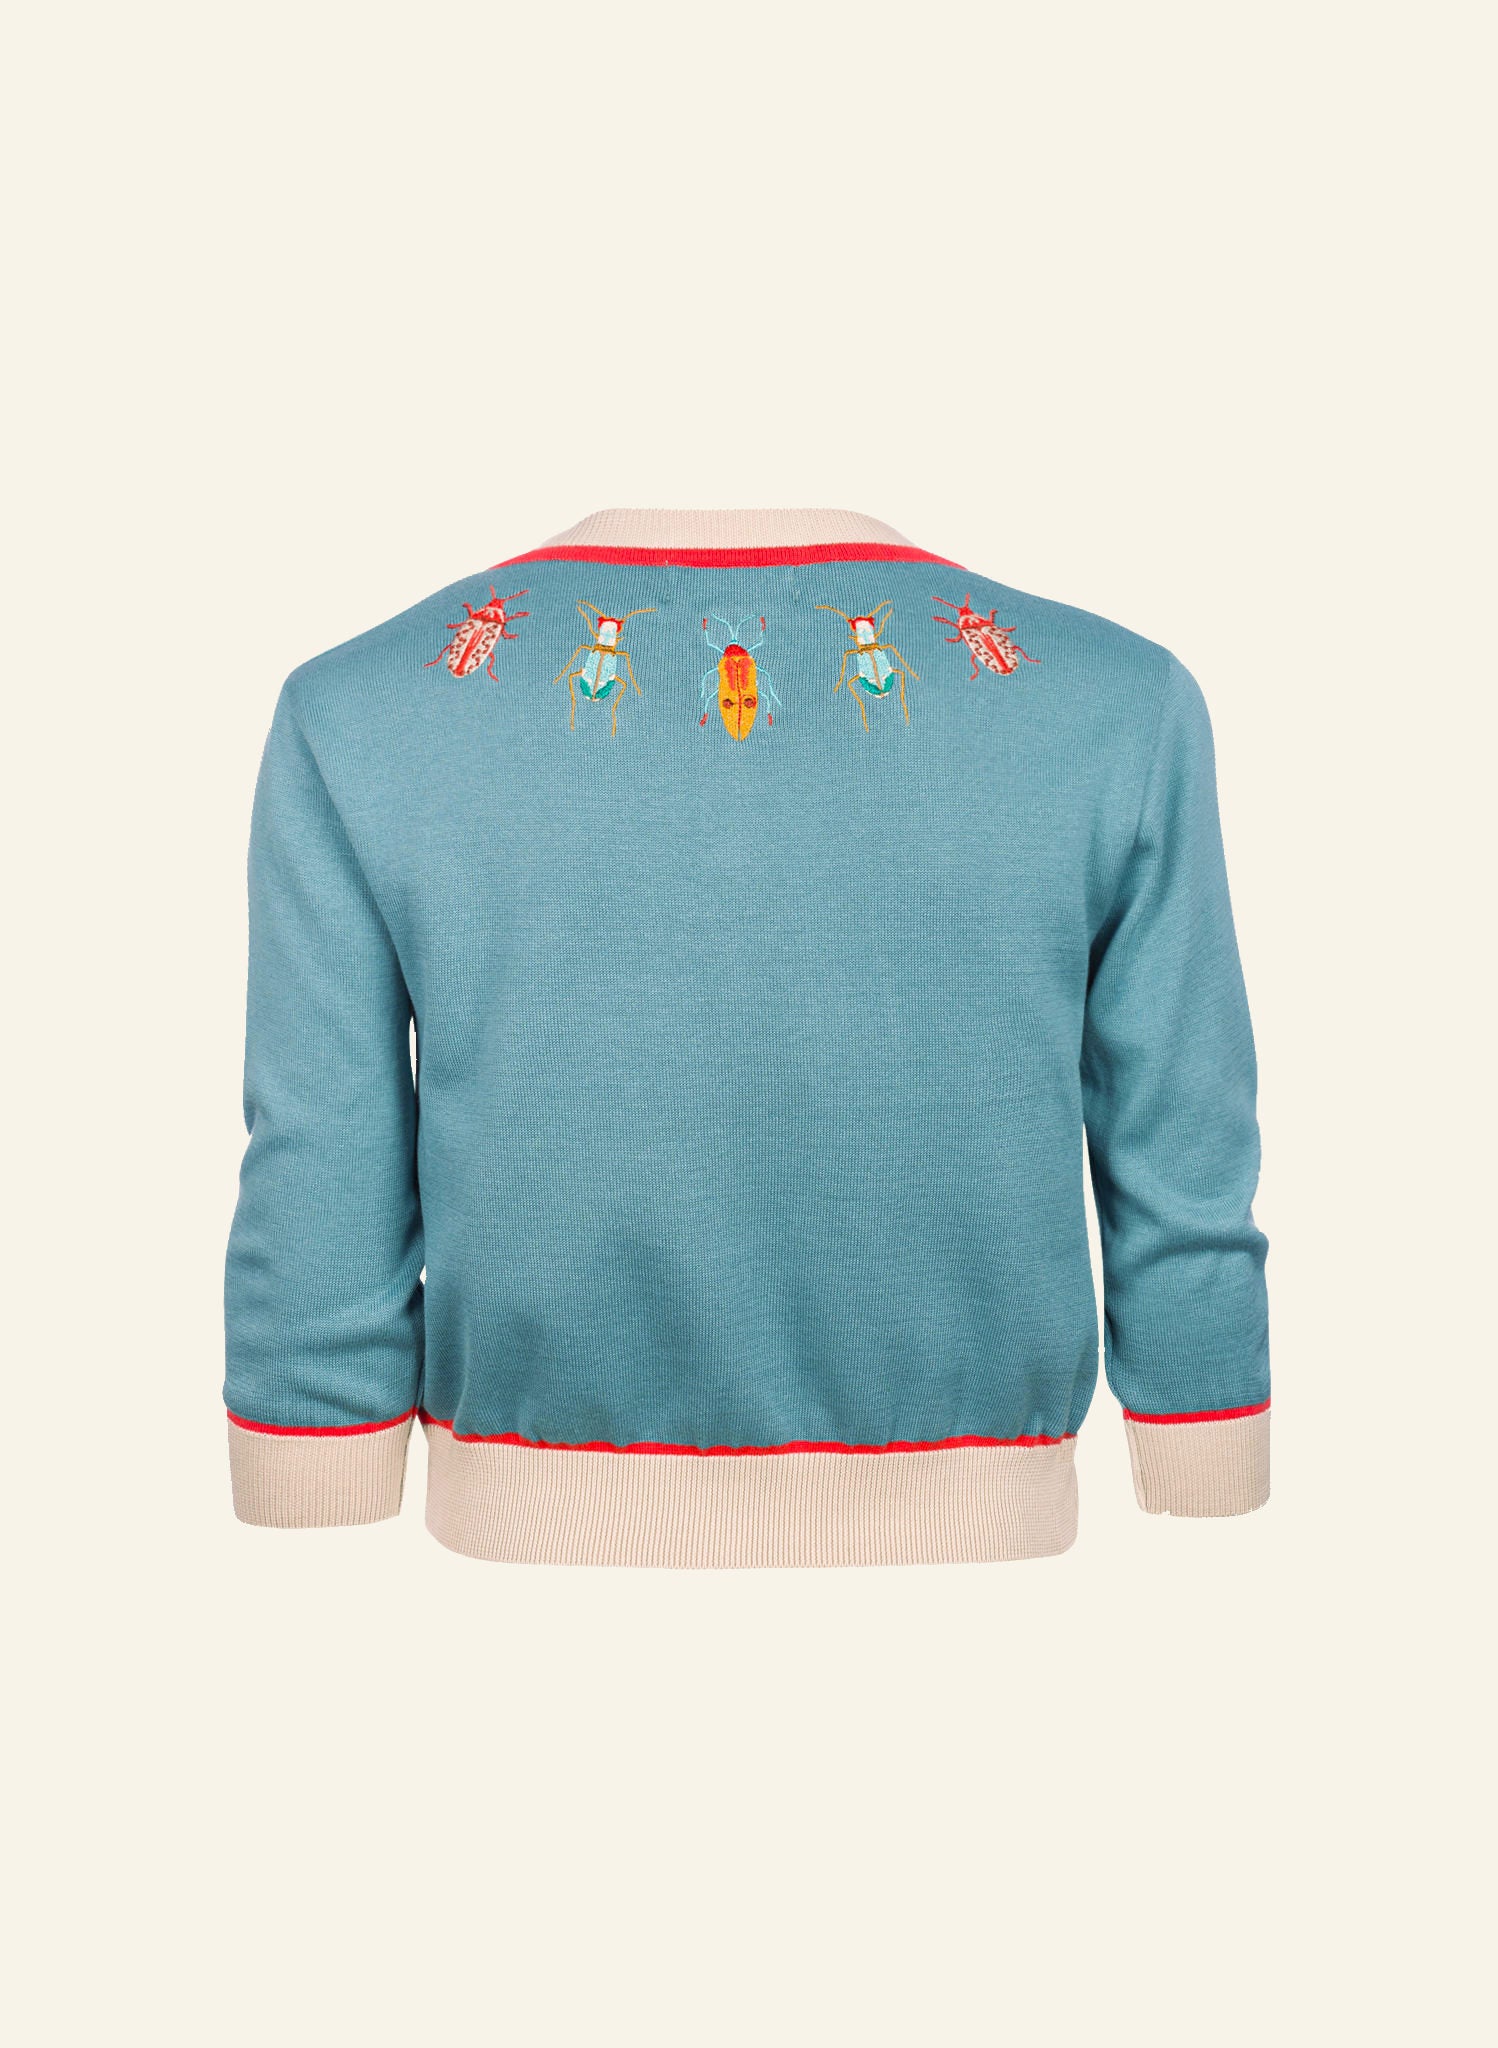 Vera - Teal Bugs Embroidered Cardigan